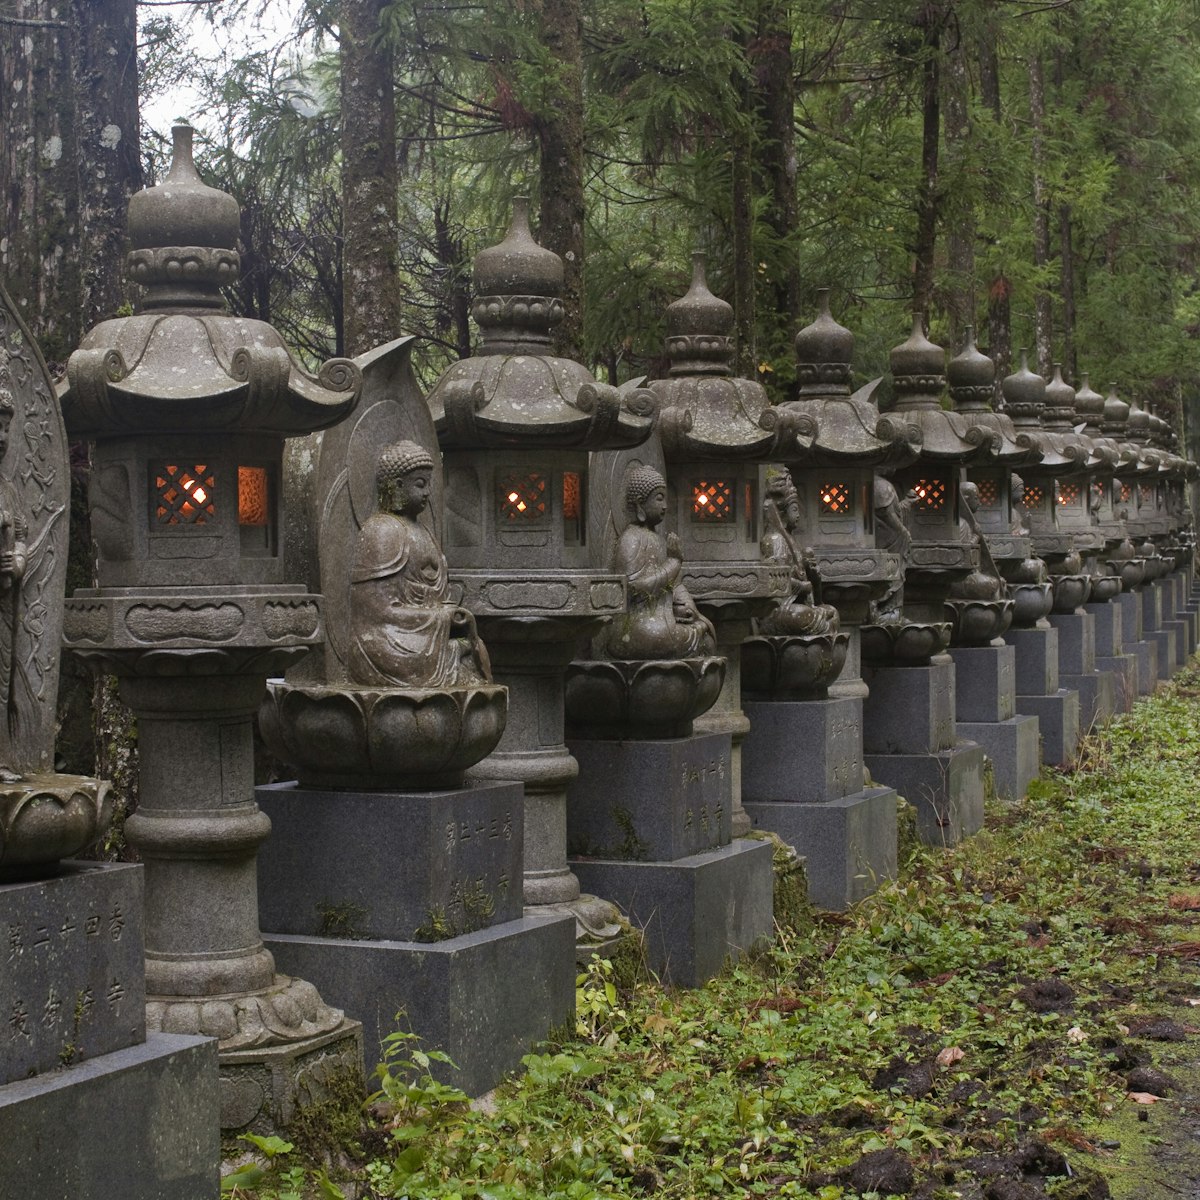 Row of stone lanterns at Oku-no-in cemetery.